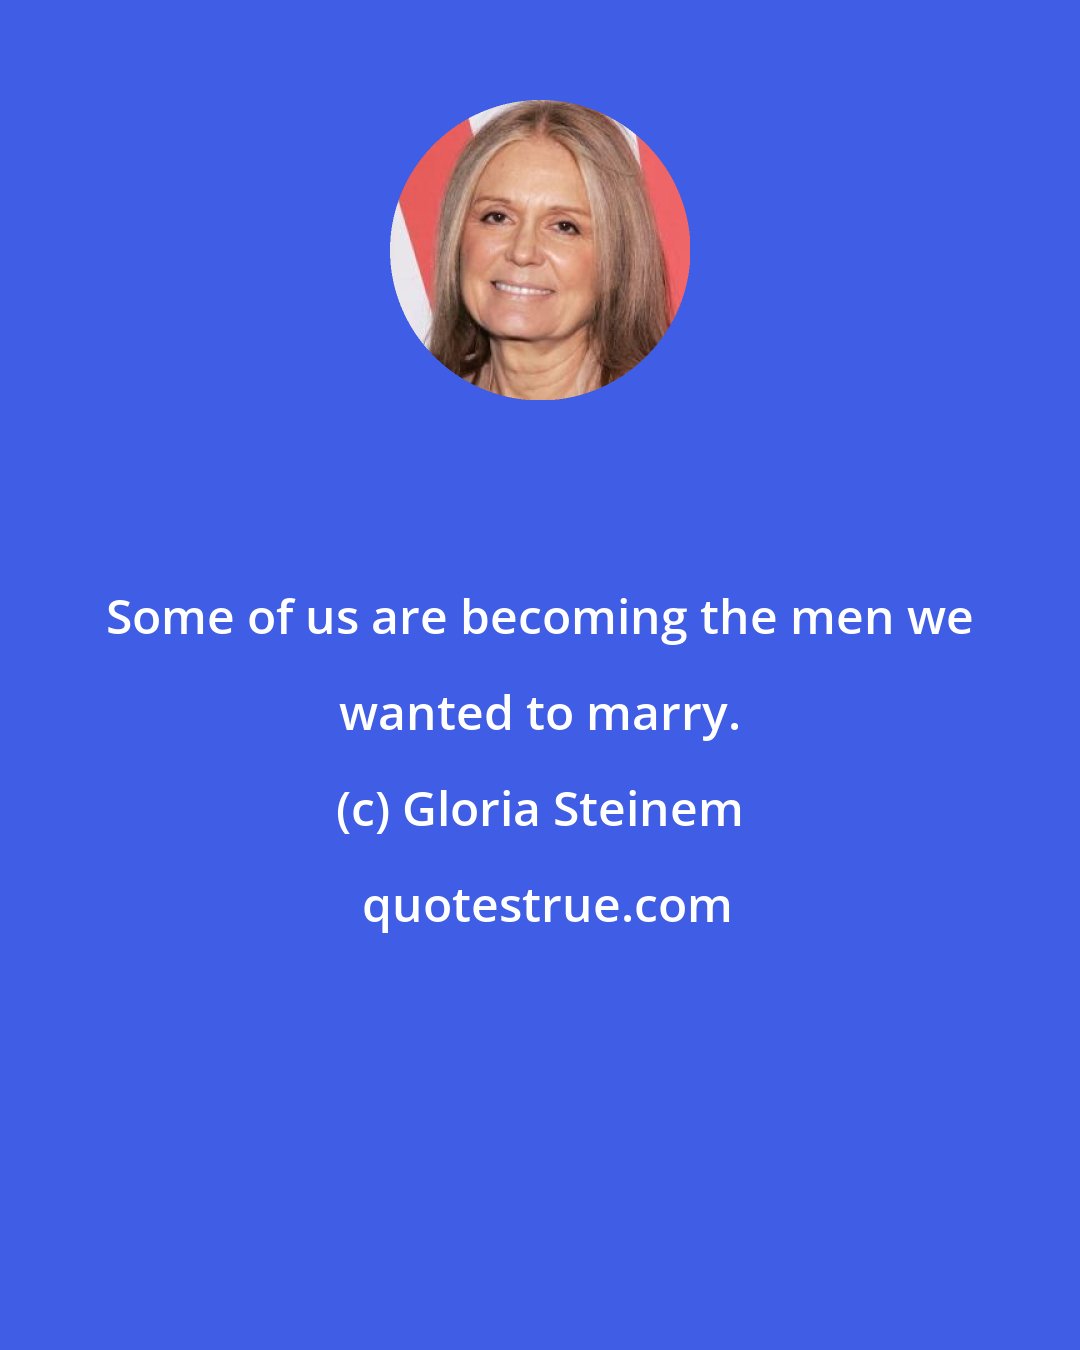 Gloria Steinem: Some of us are becoming the men we wanted to marry.